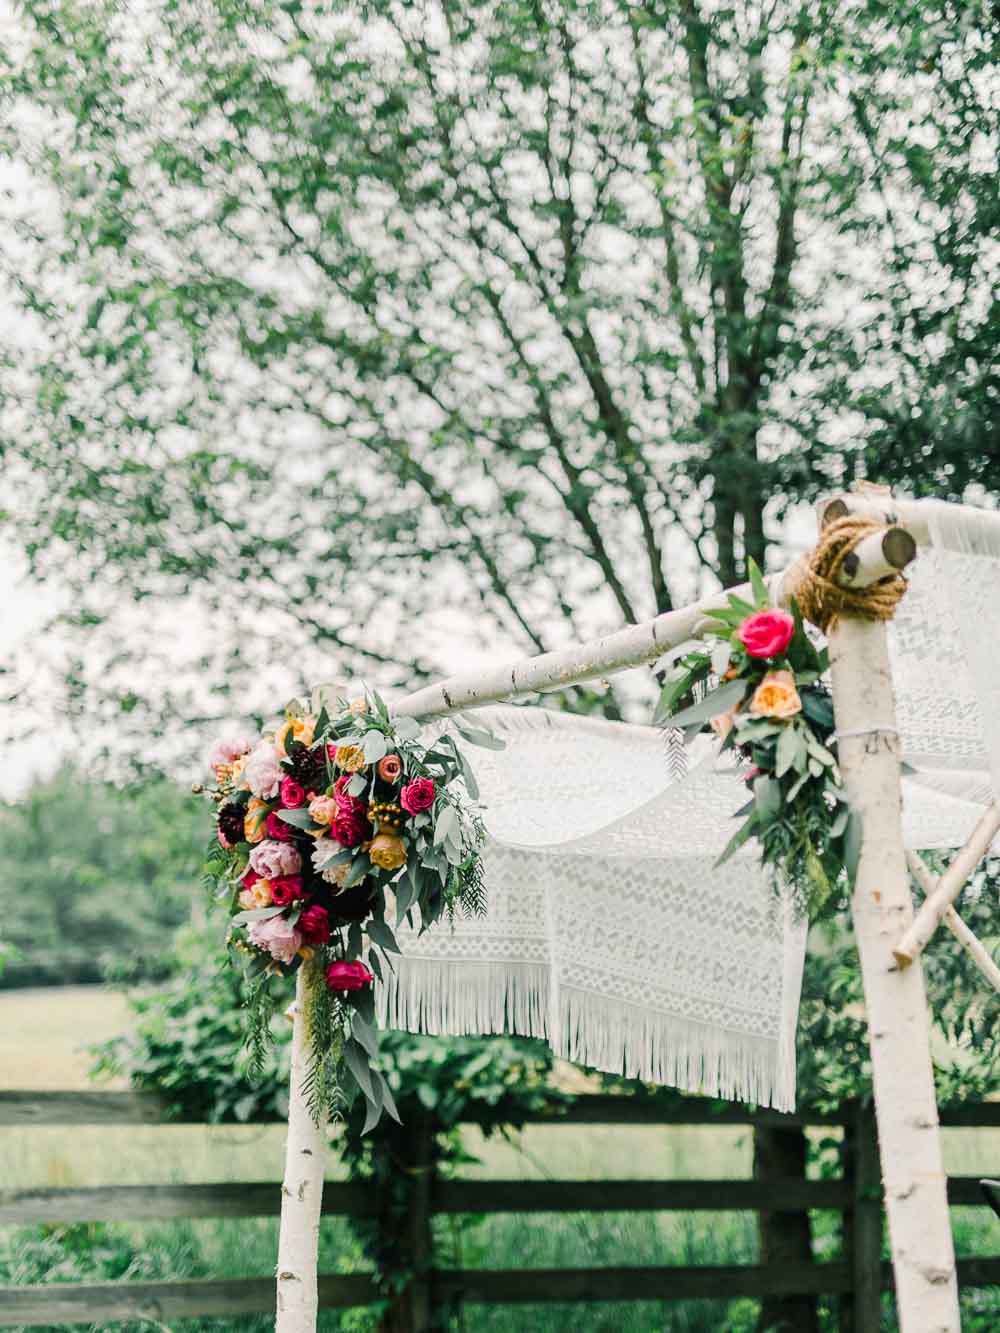 ceremony decor for an intimate backyard wedding in cleveland Ohio